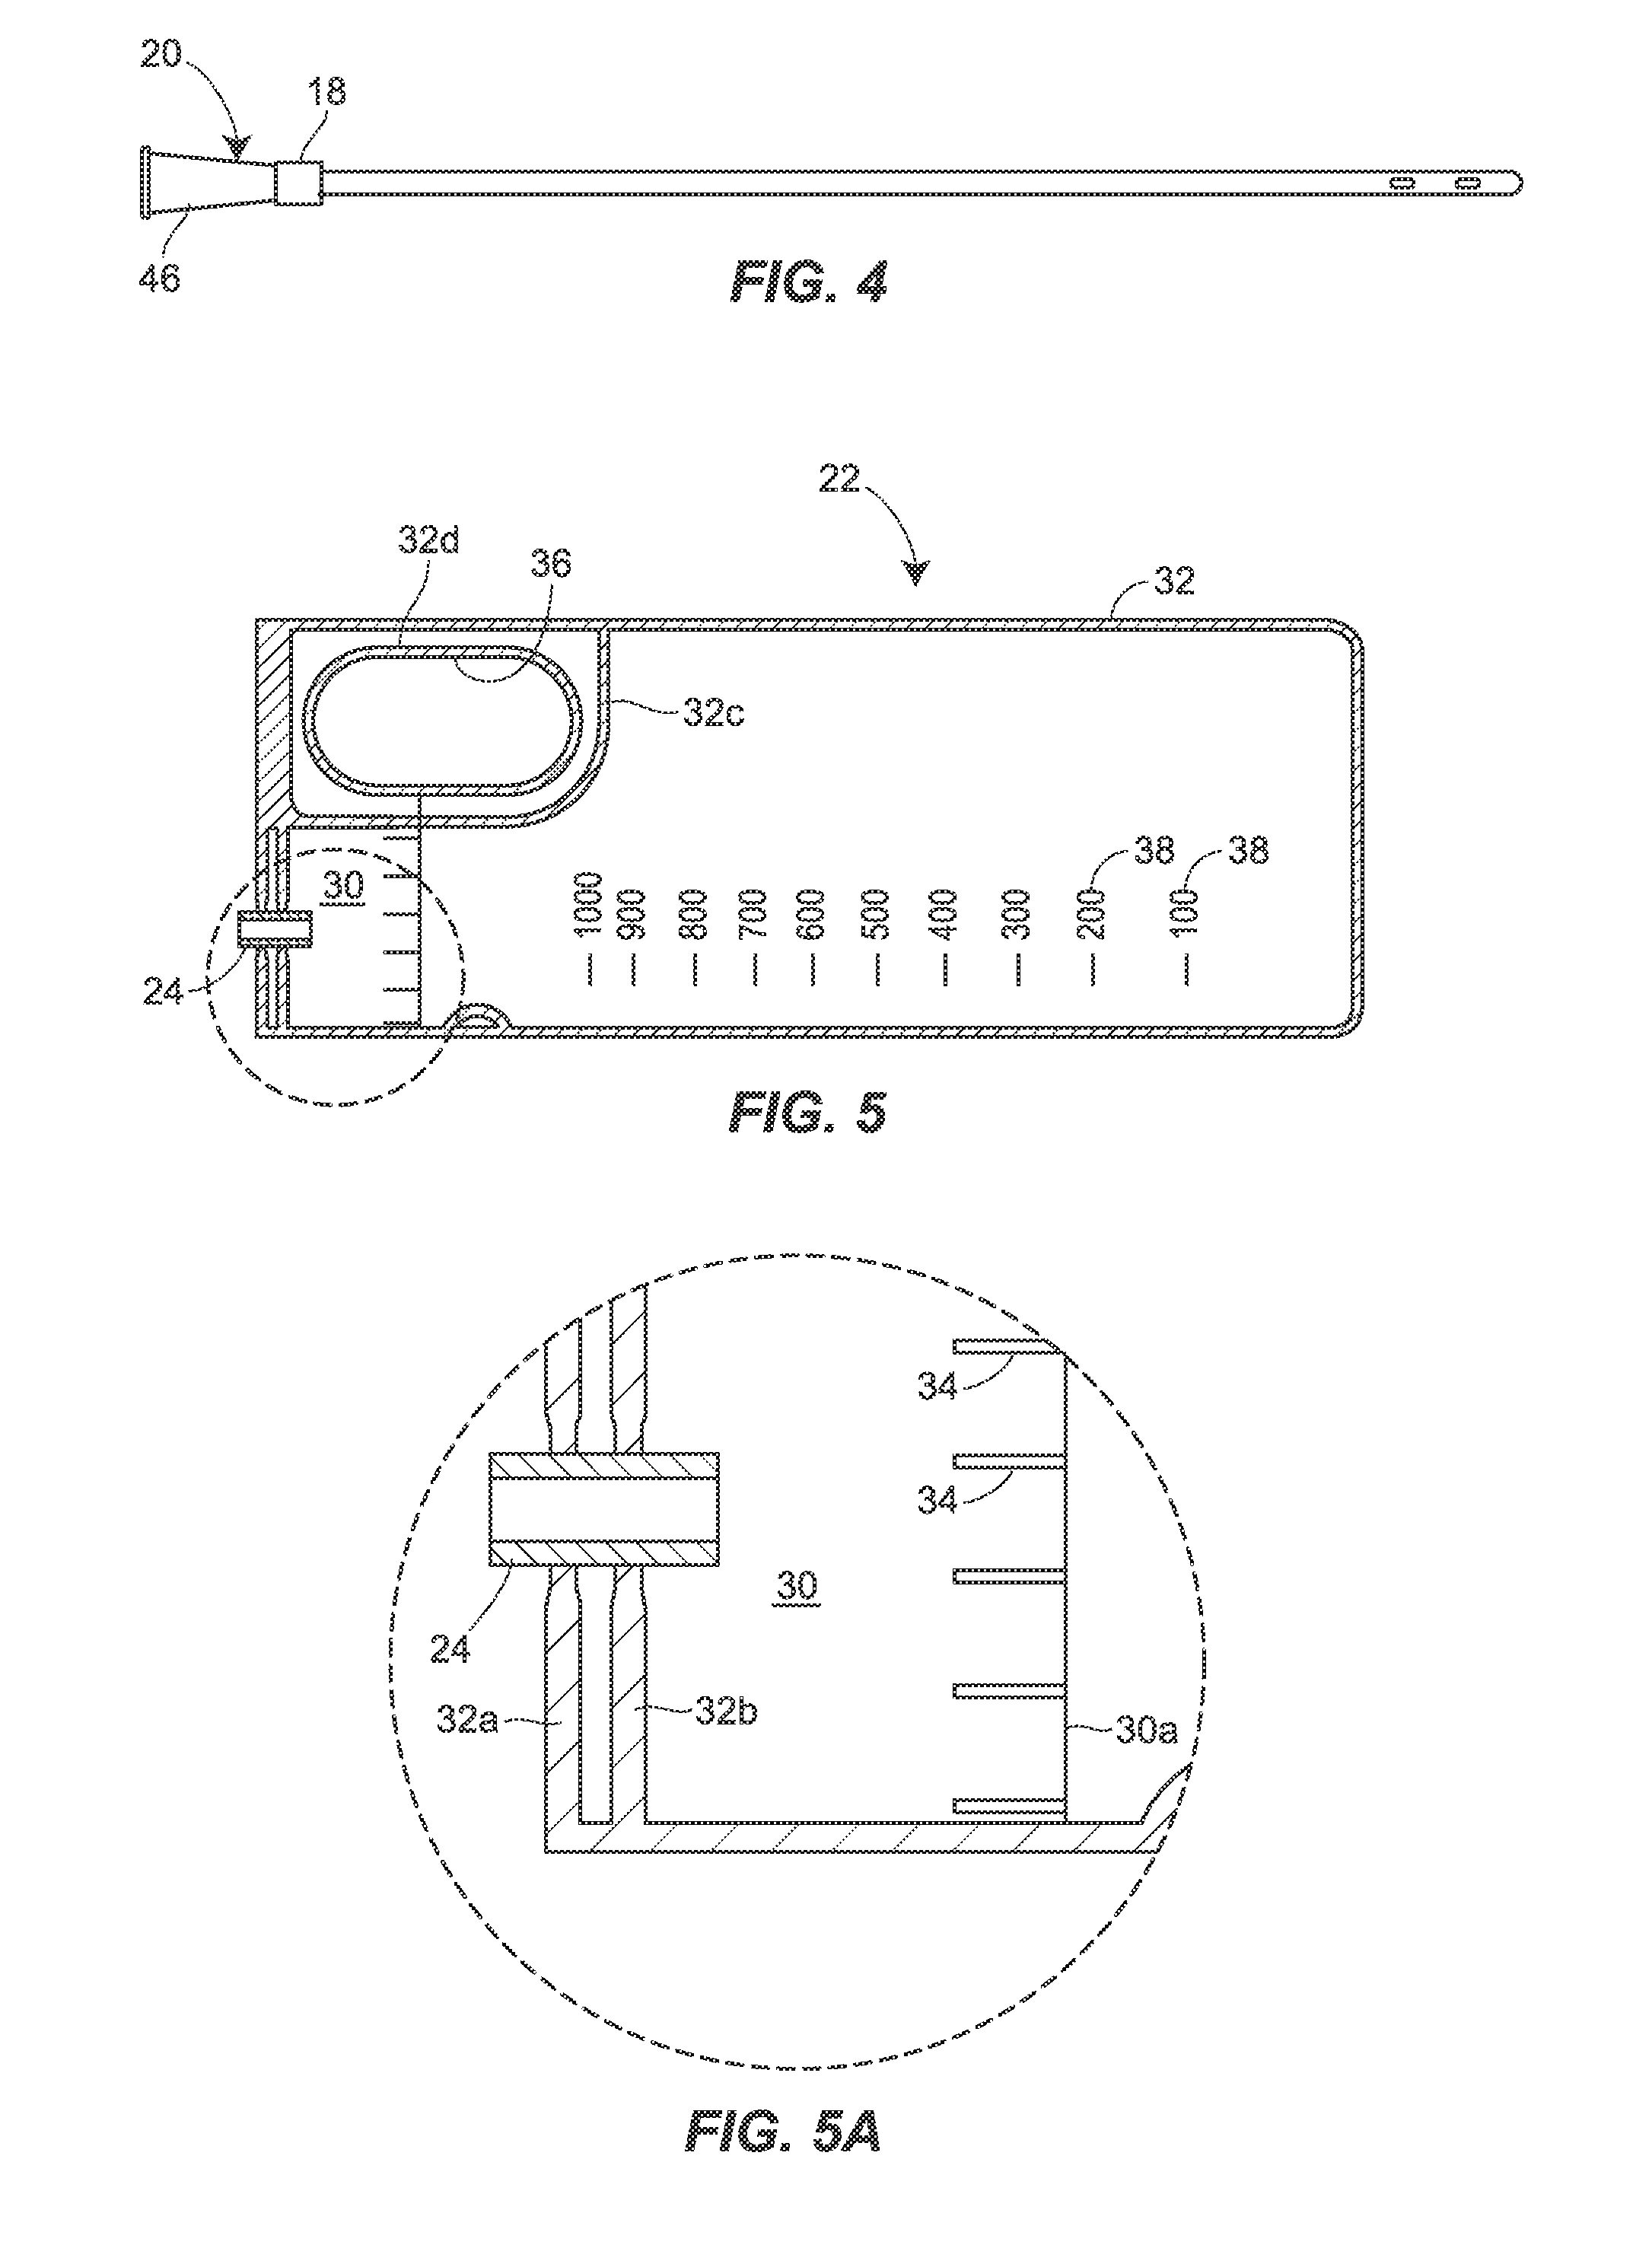 Urine collection assembly and method